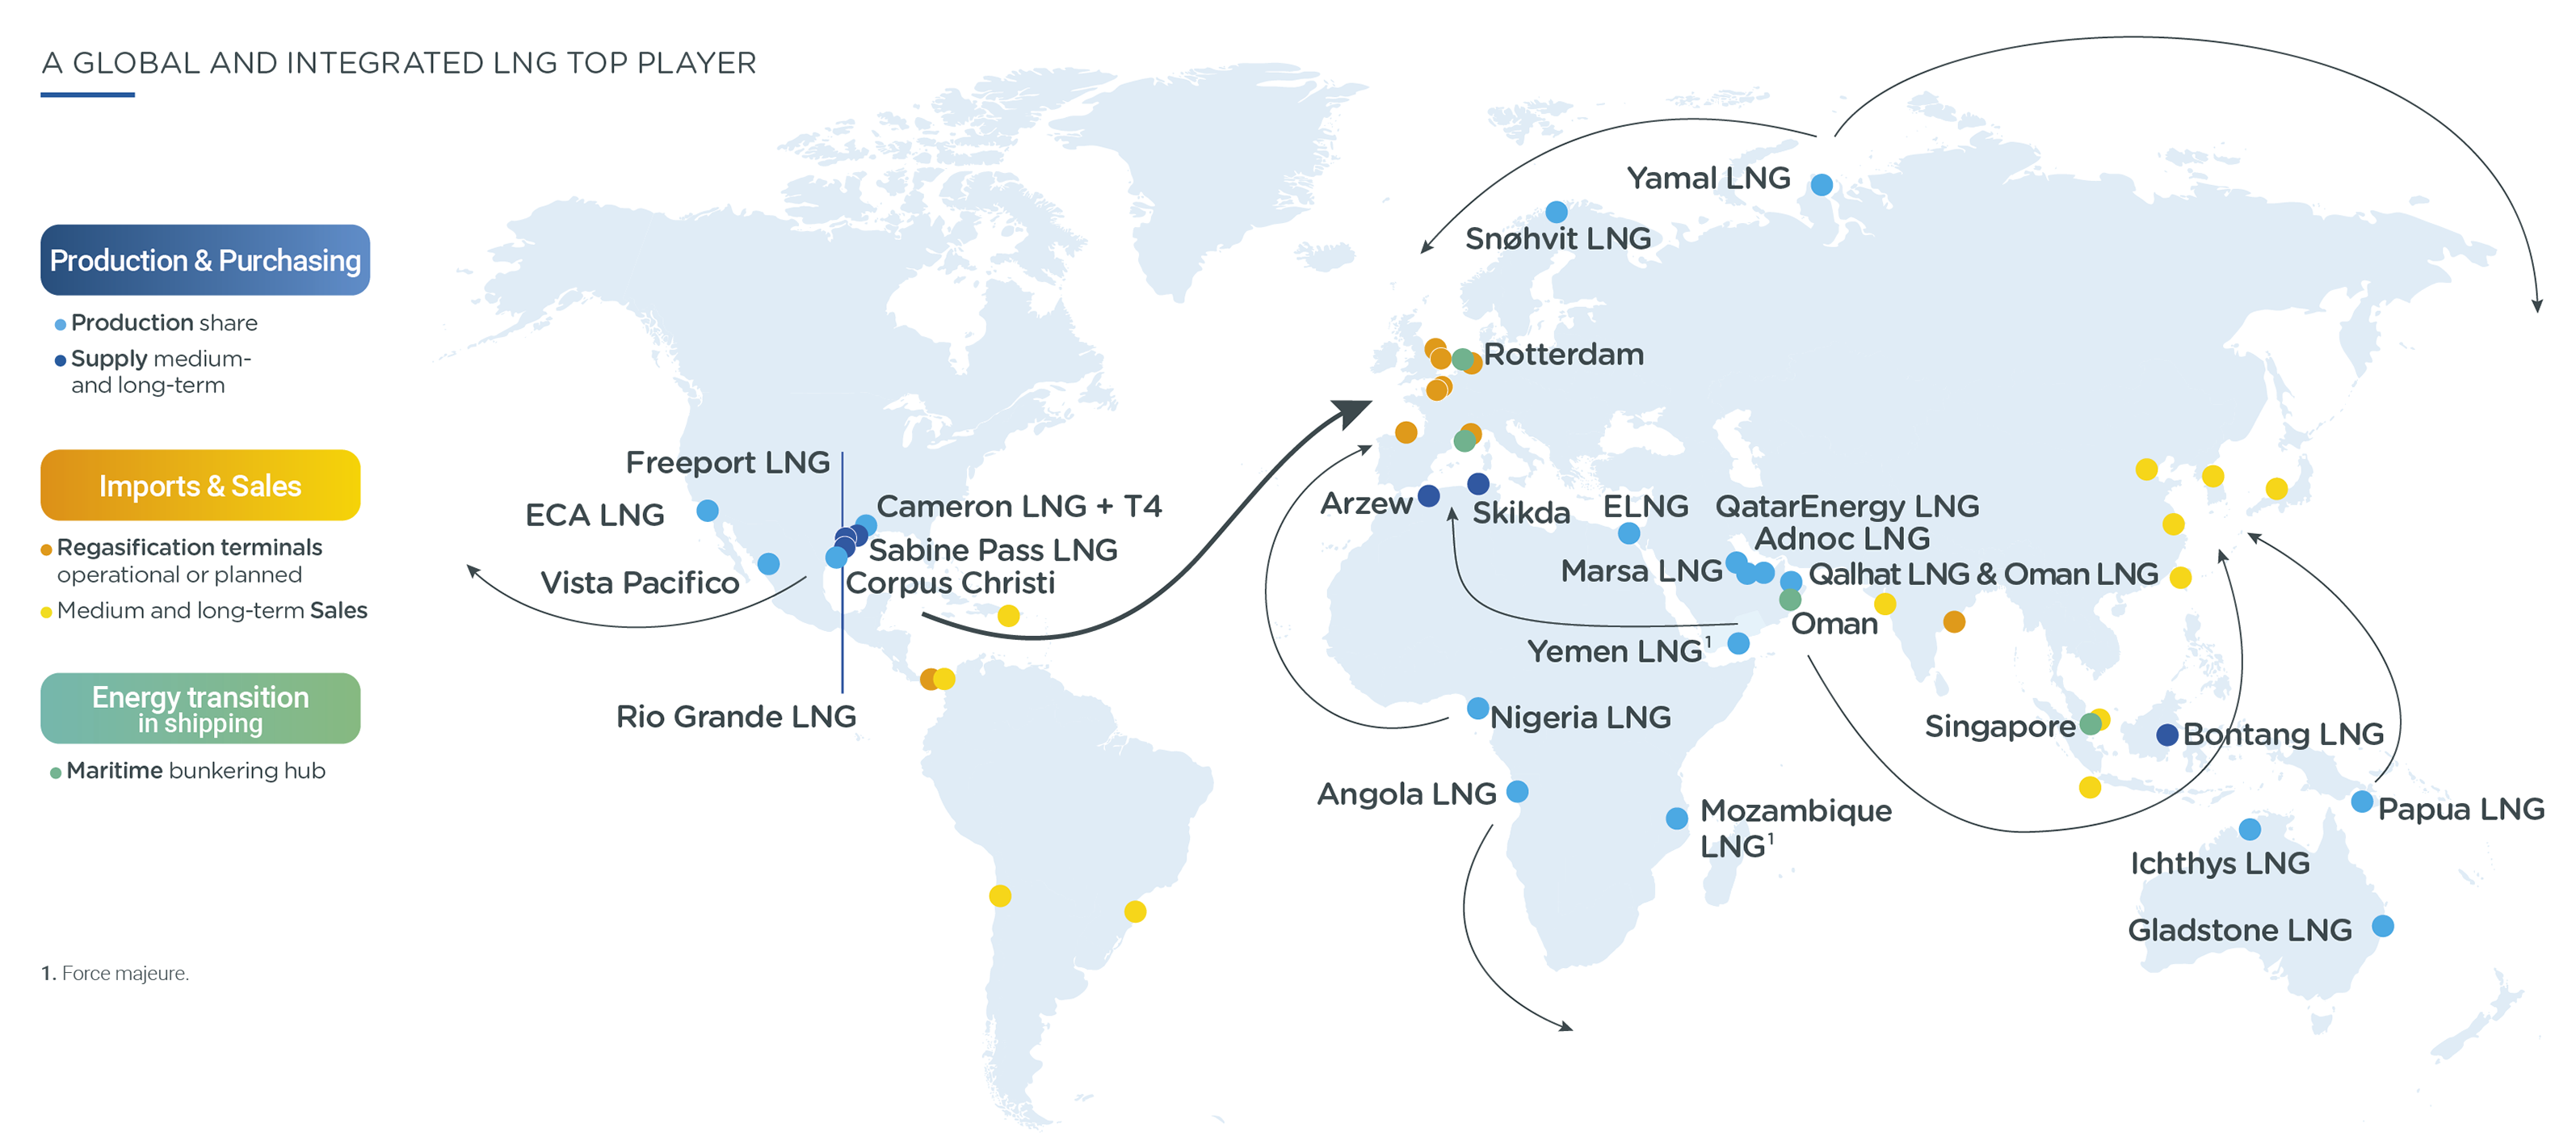 Infographics "An integrated global LNG player" - see description hereafter